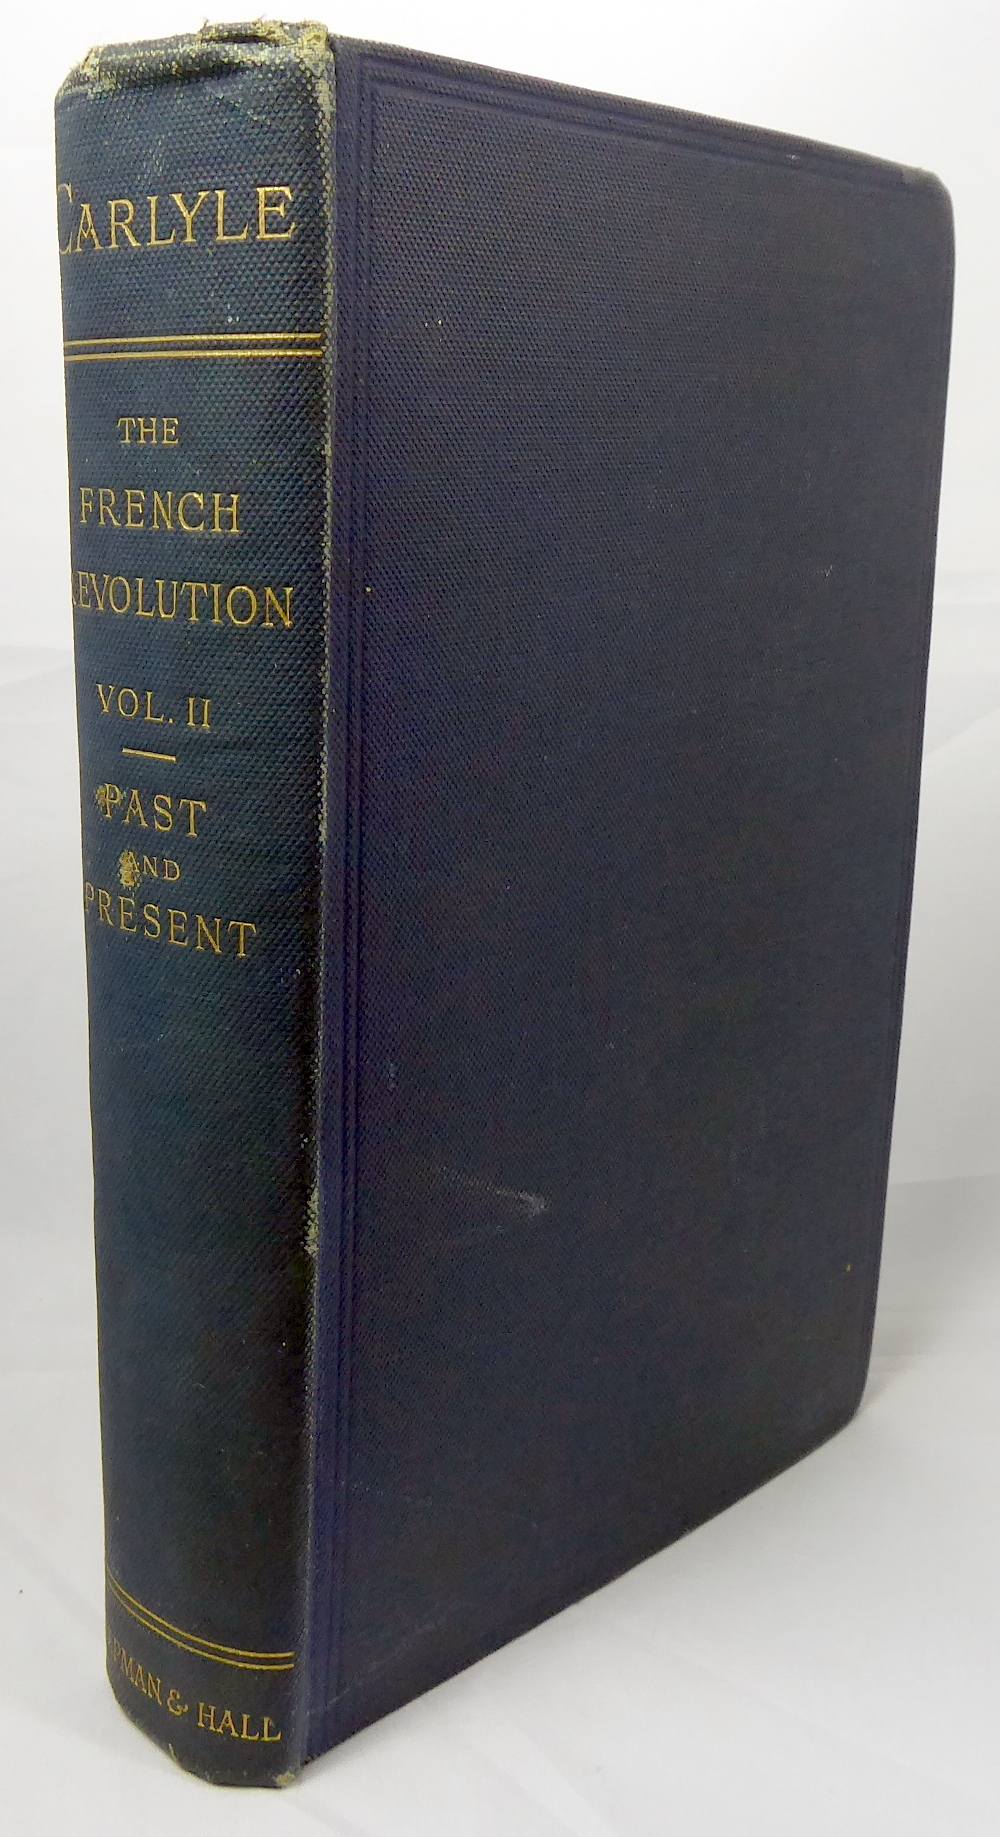 CARLYLE, THOMAS - The French Revolution, Volume II the Guillotine